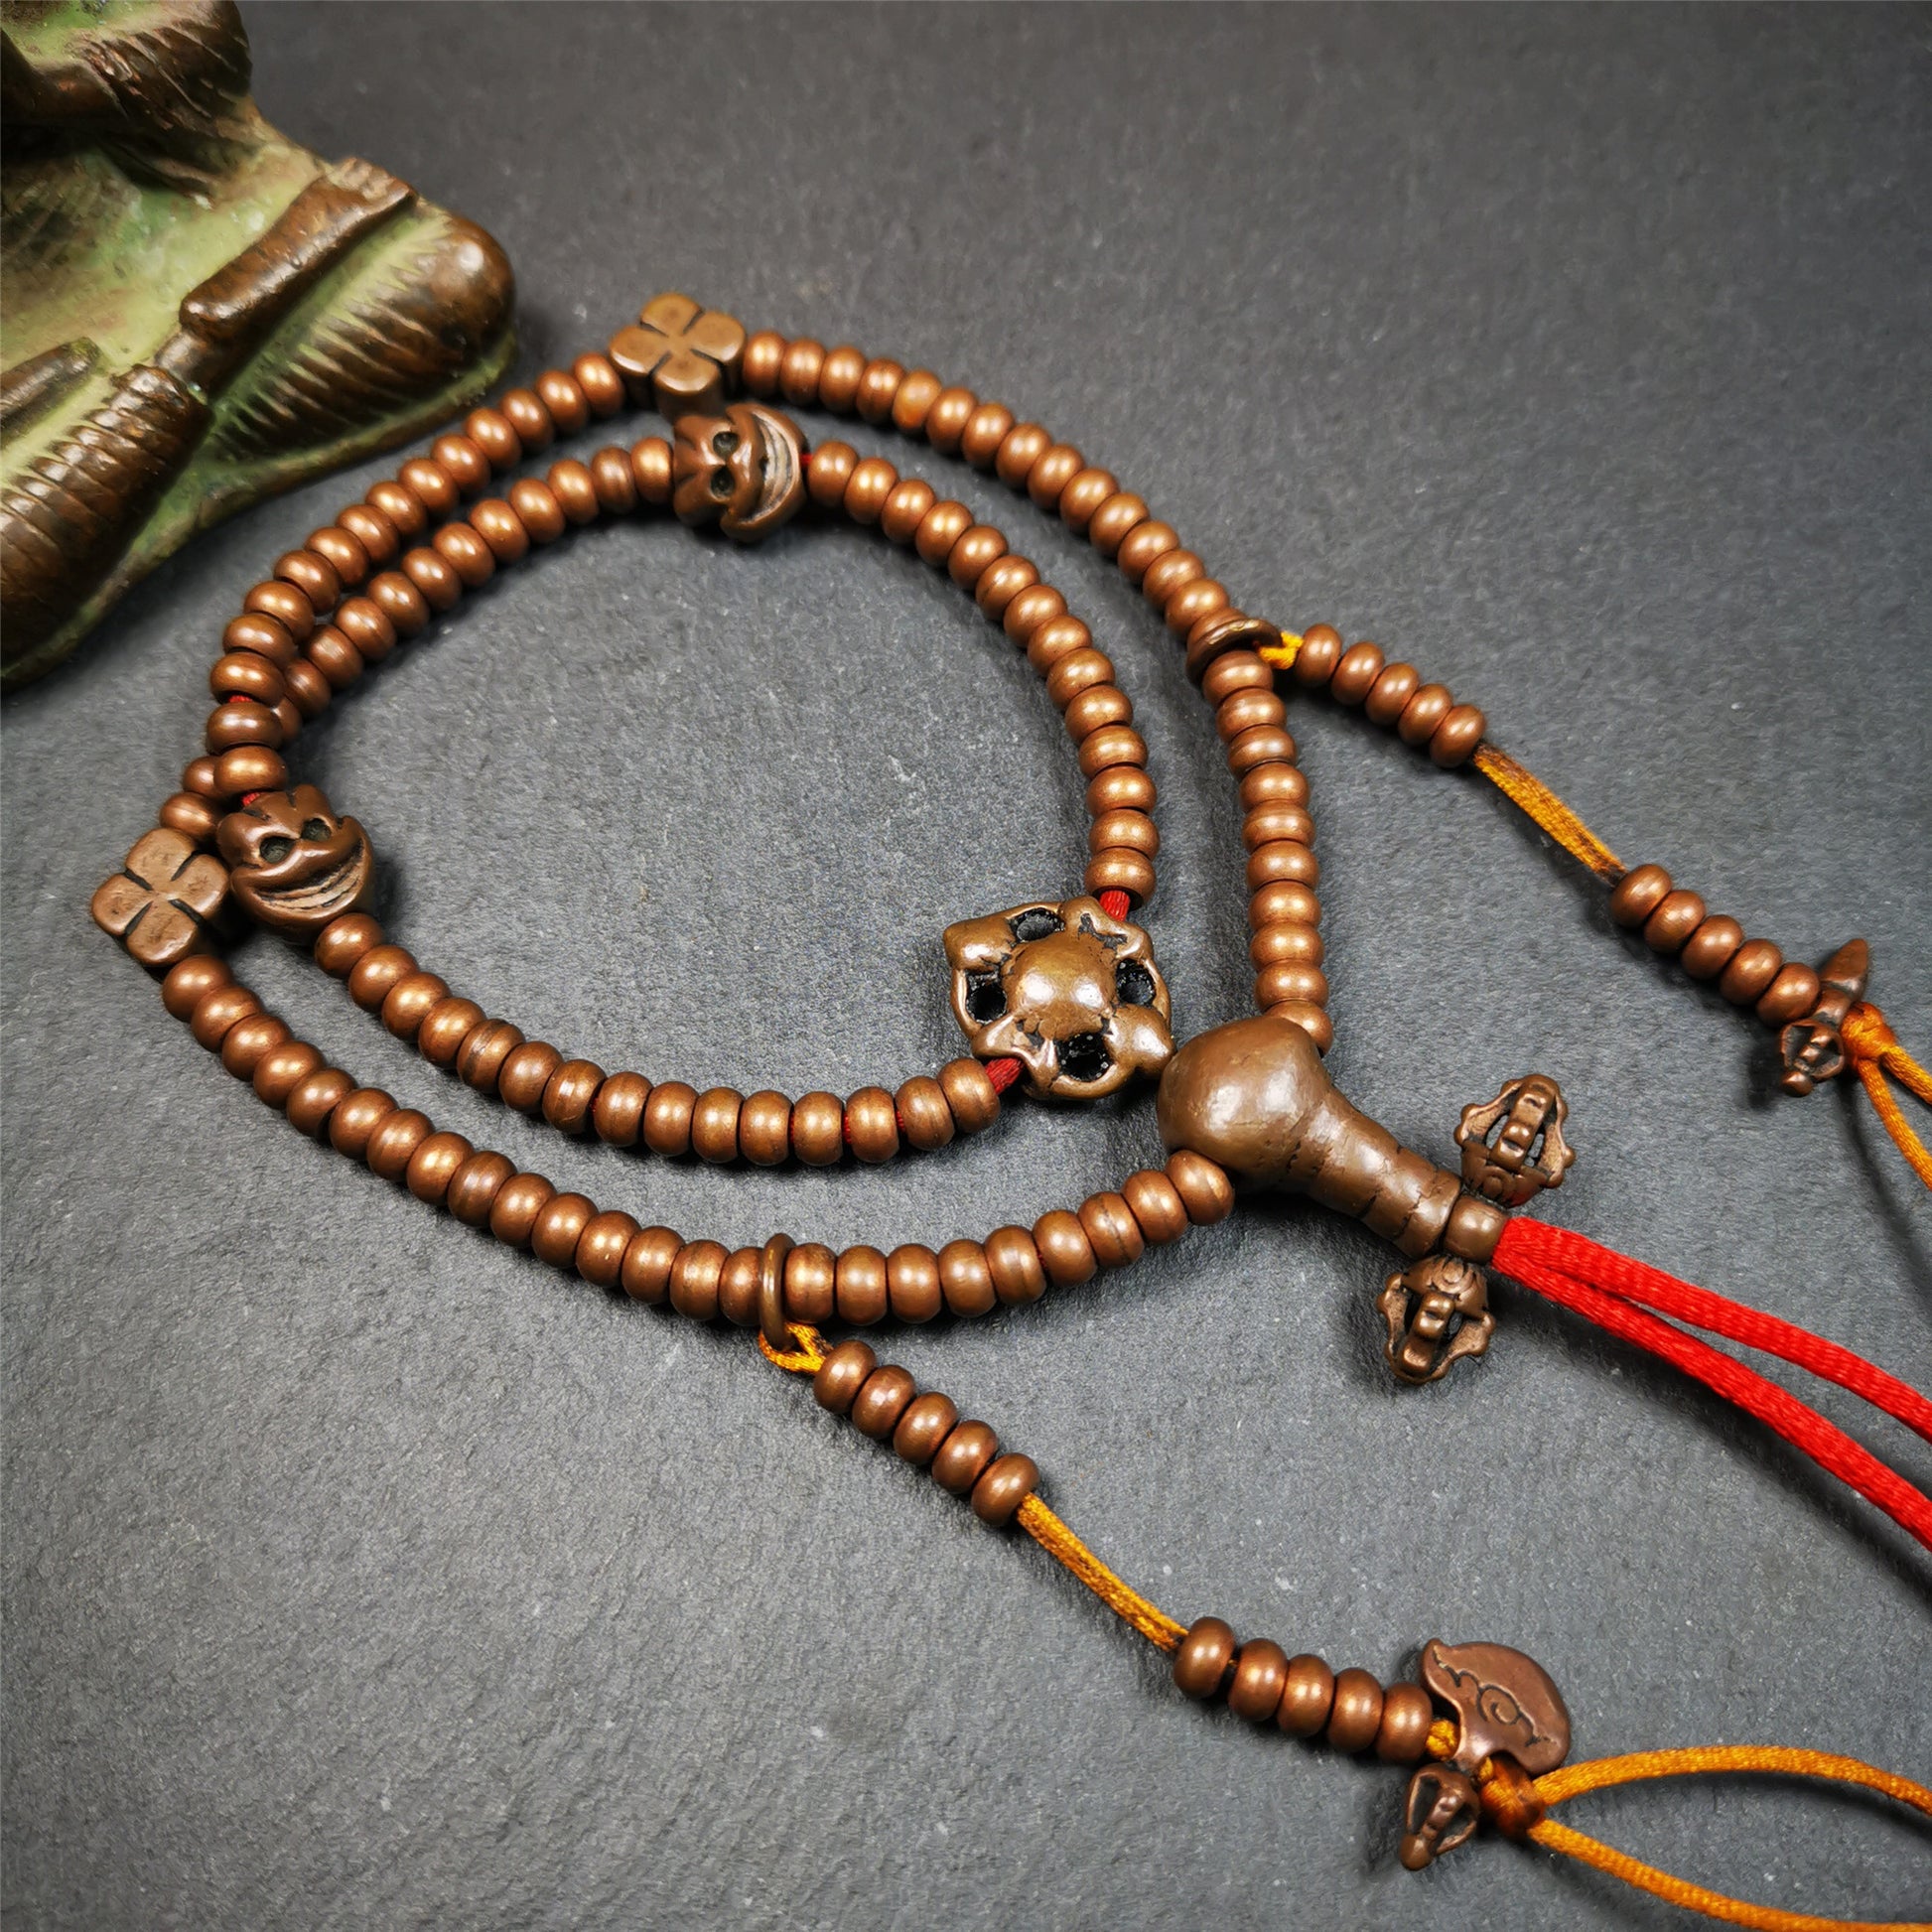 This mala was collect from Hepo Town Baiyu County Tibet, blessed in Yaqing Monastry. It is made of copper,brown color,length is 44cm / 18",has 1 Kartika ,2 skeletons, 2 stamp pendant, and 2 strings of counters with phurba + kartika.